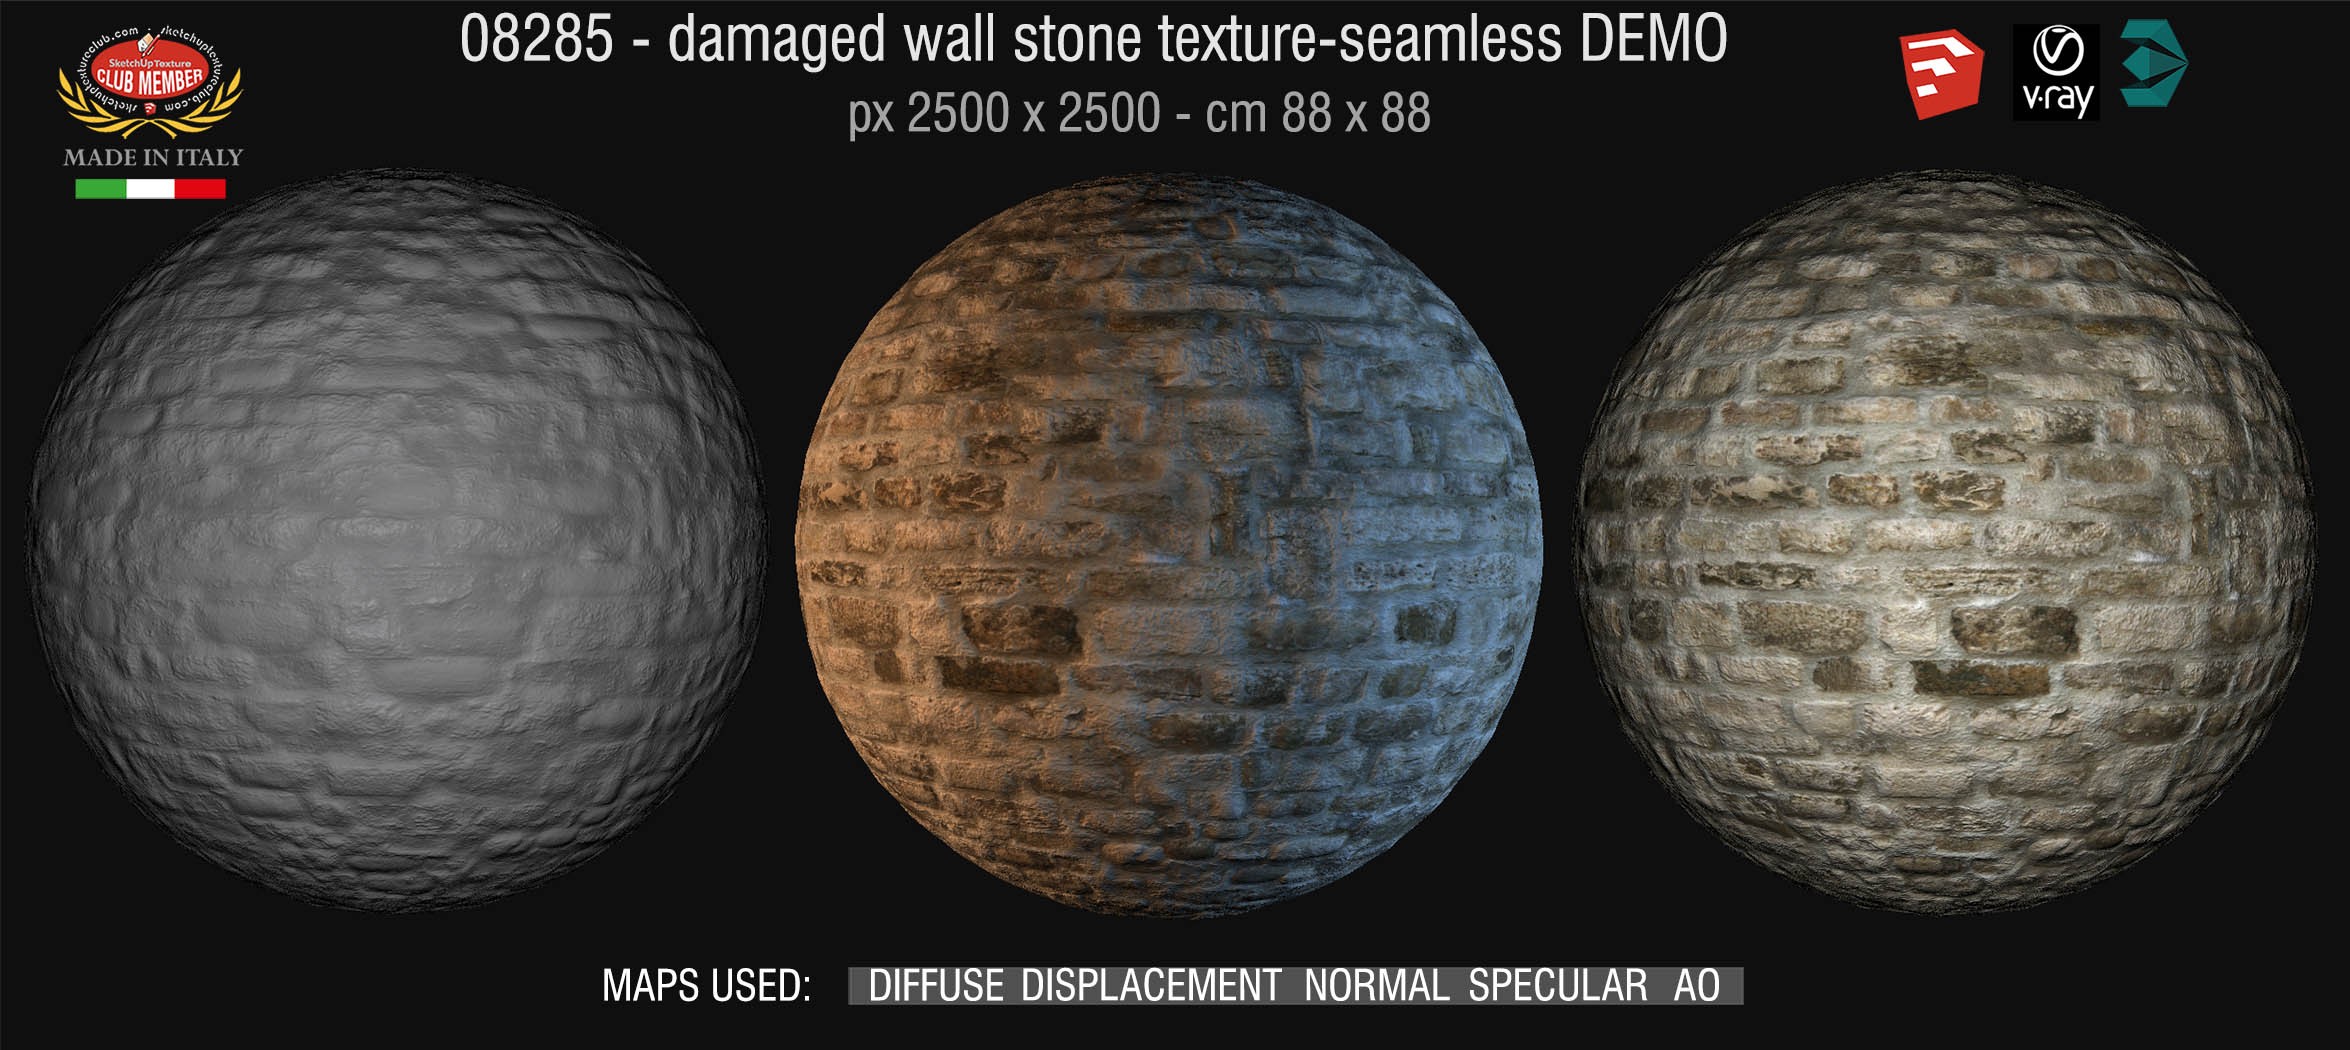 08285 HR Damaged wall stone texture + maps DEMO